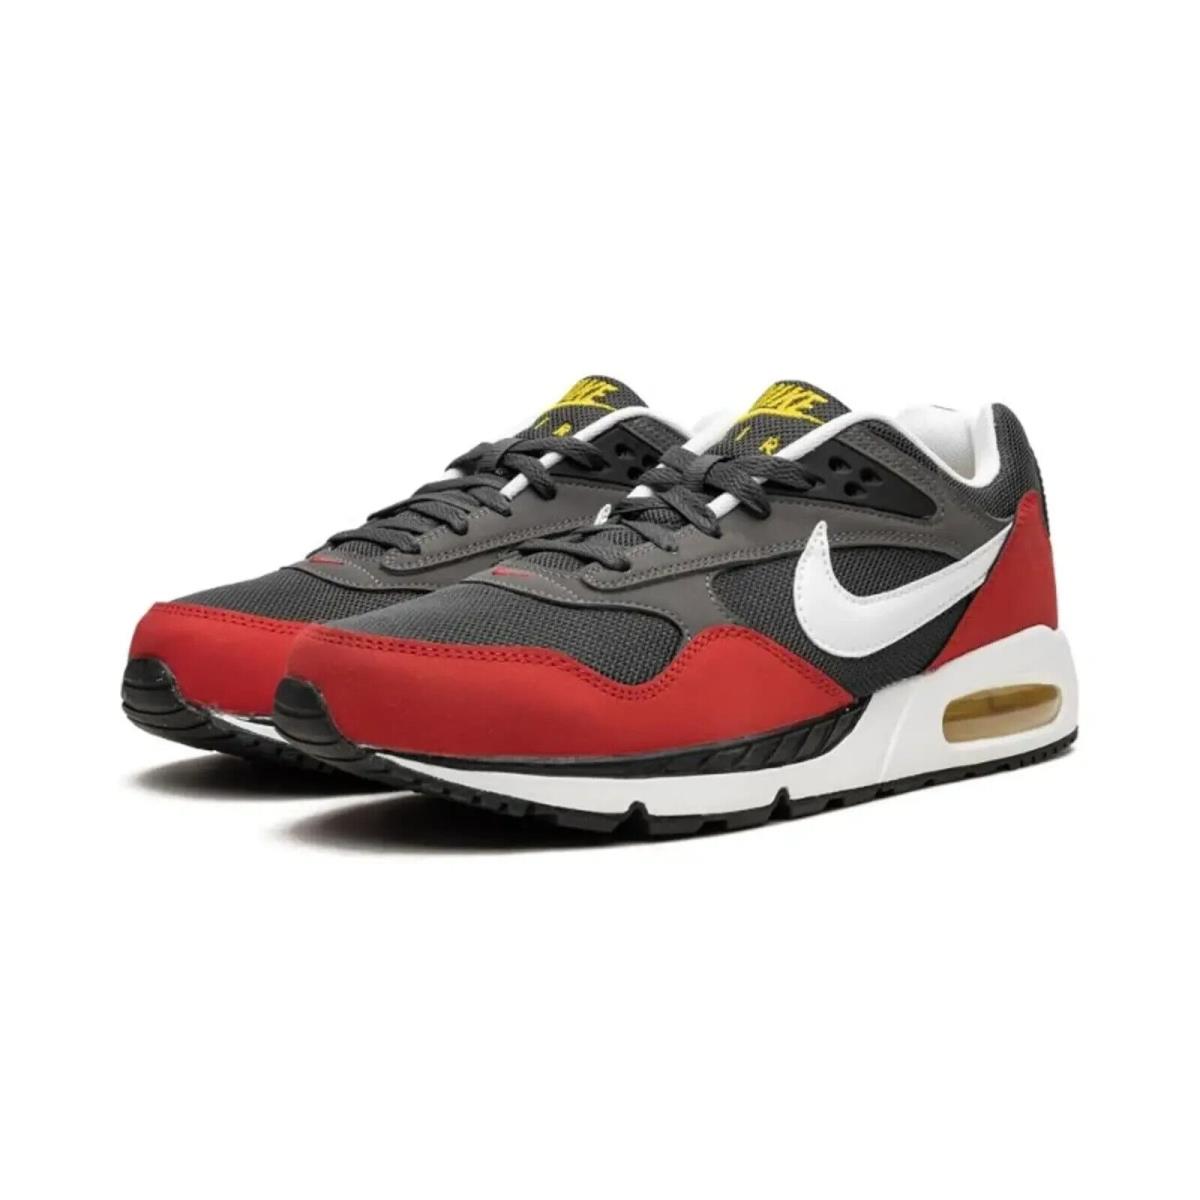 Nike Air Max Correlate 511416-016 Men`s Red/white/black Running Shoes ANK341 - Red/White/Black